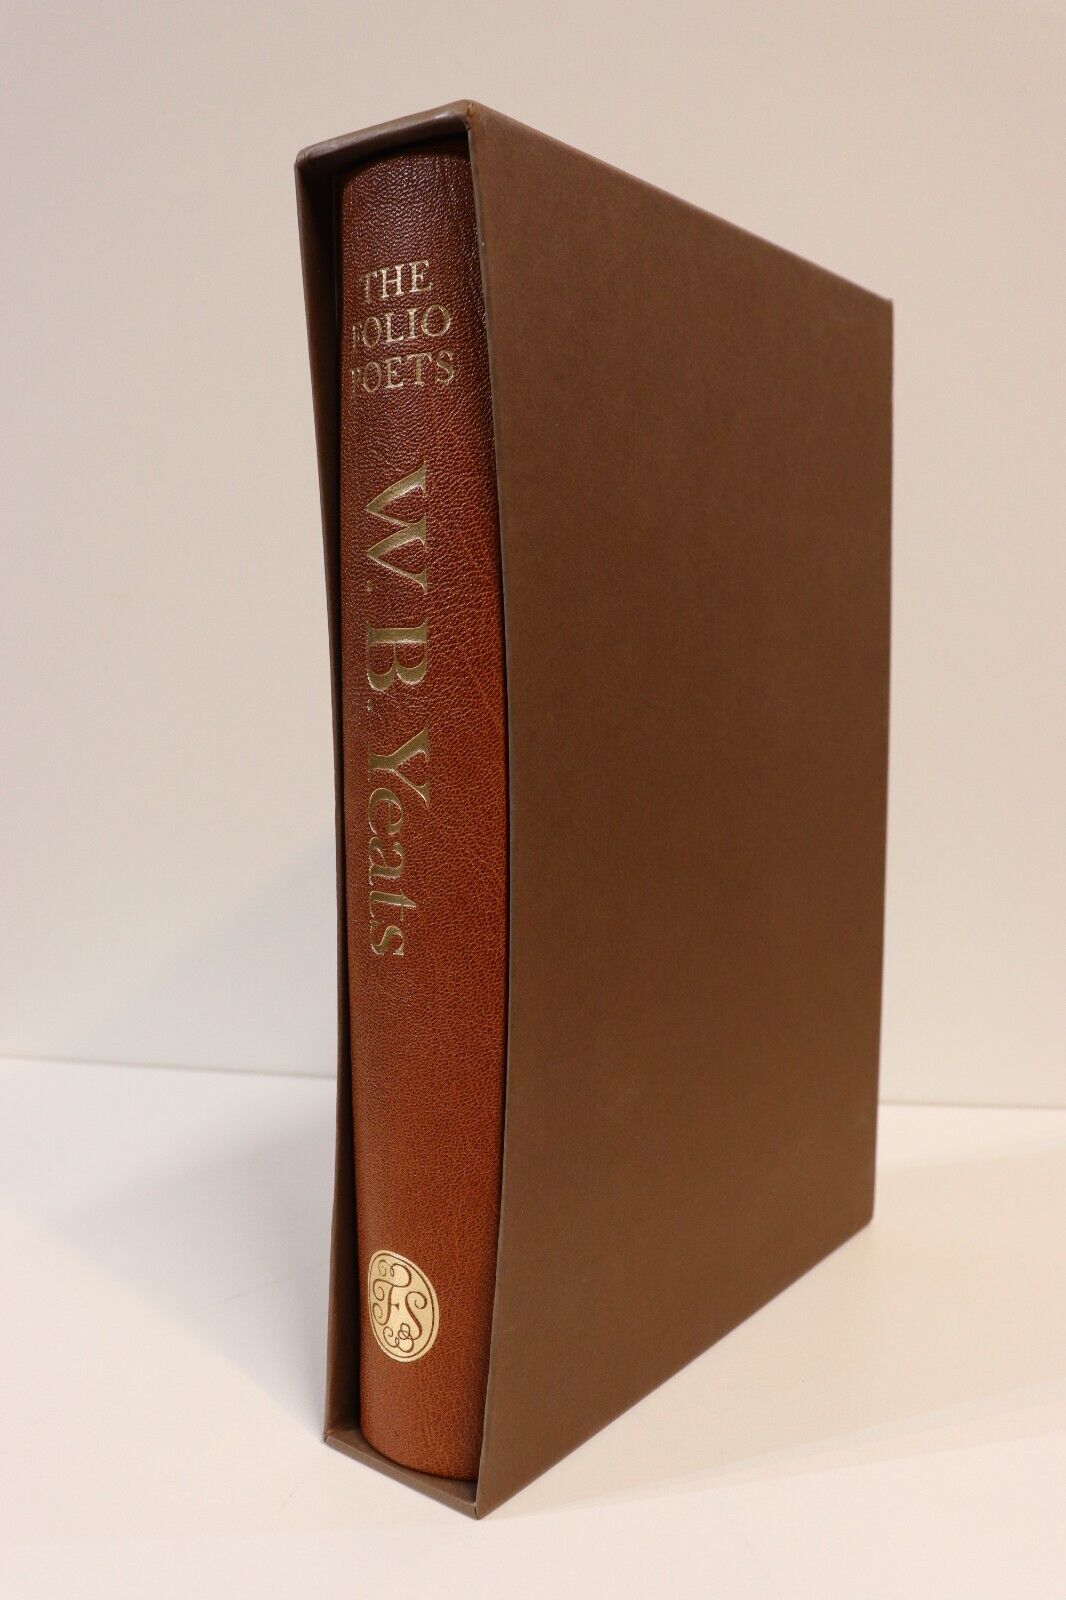 W.B. Yeats: Collected Poems - 2007 - Folio Society - Poetry Book